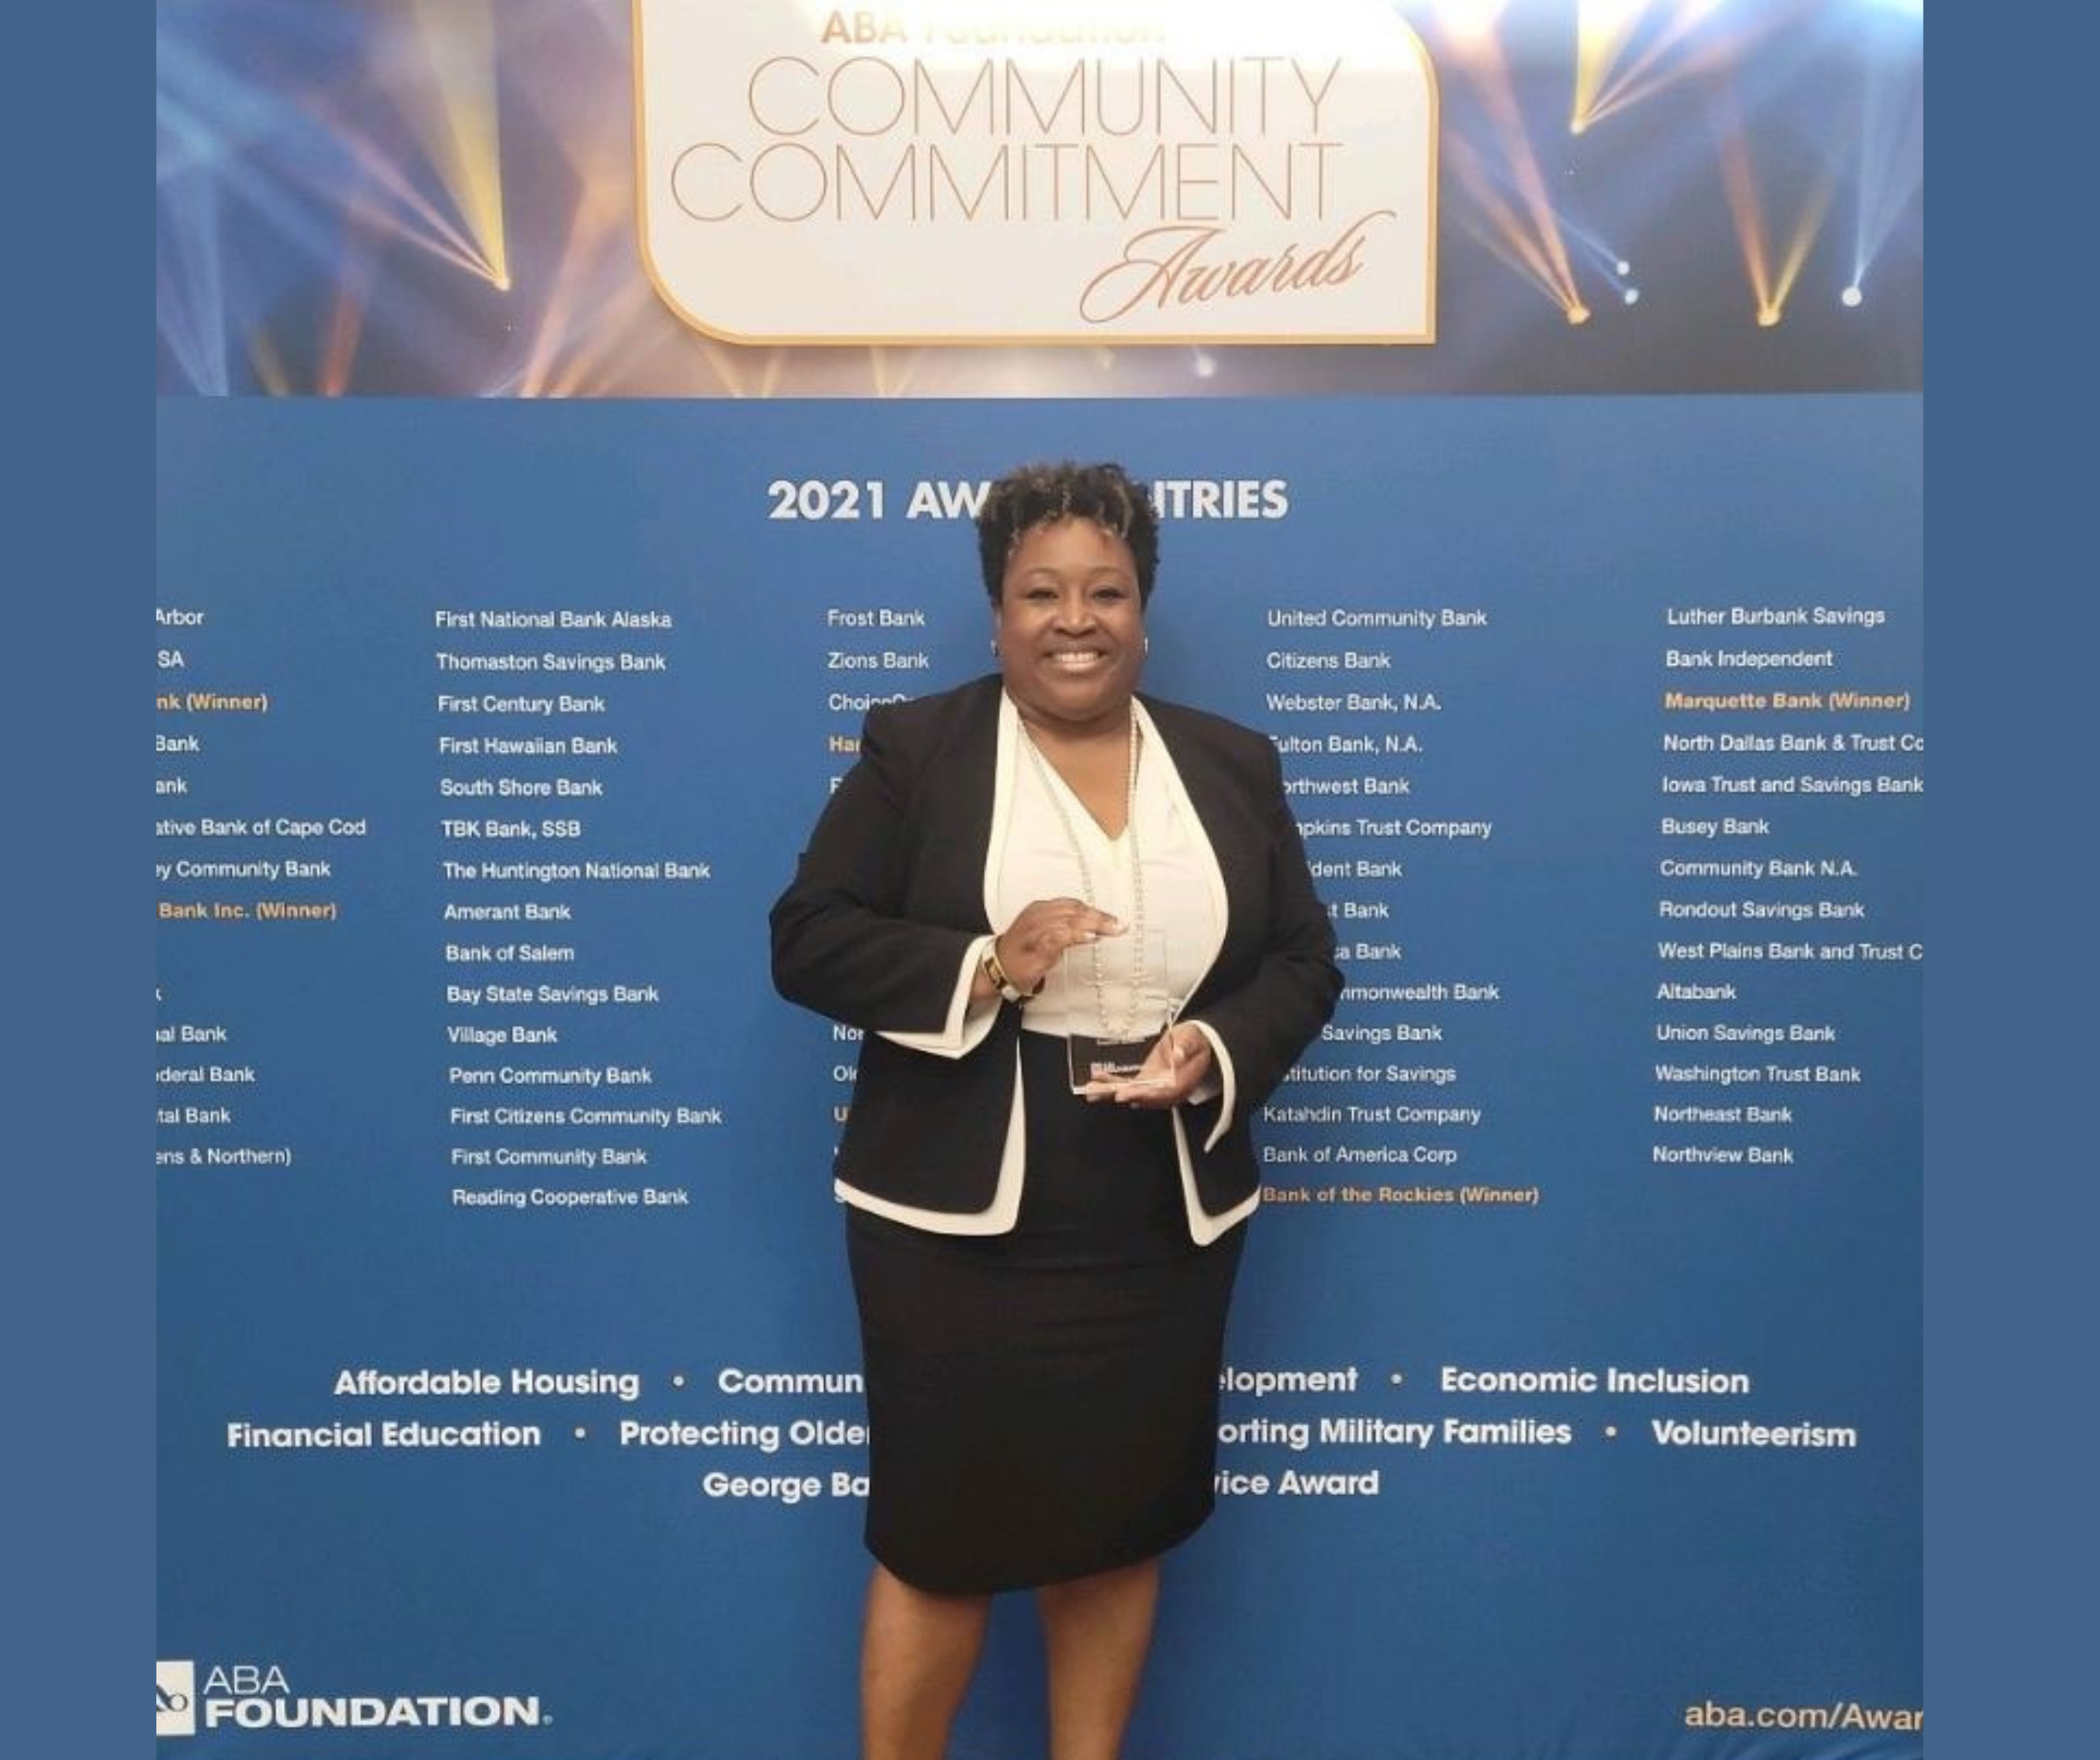 American Bankers Association Taps Hancock Whitney for Top Community Commitment Award